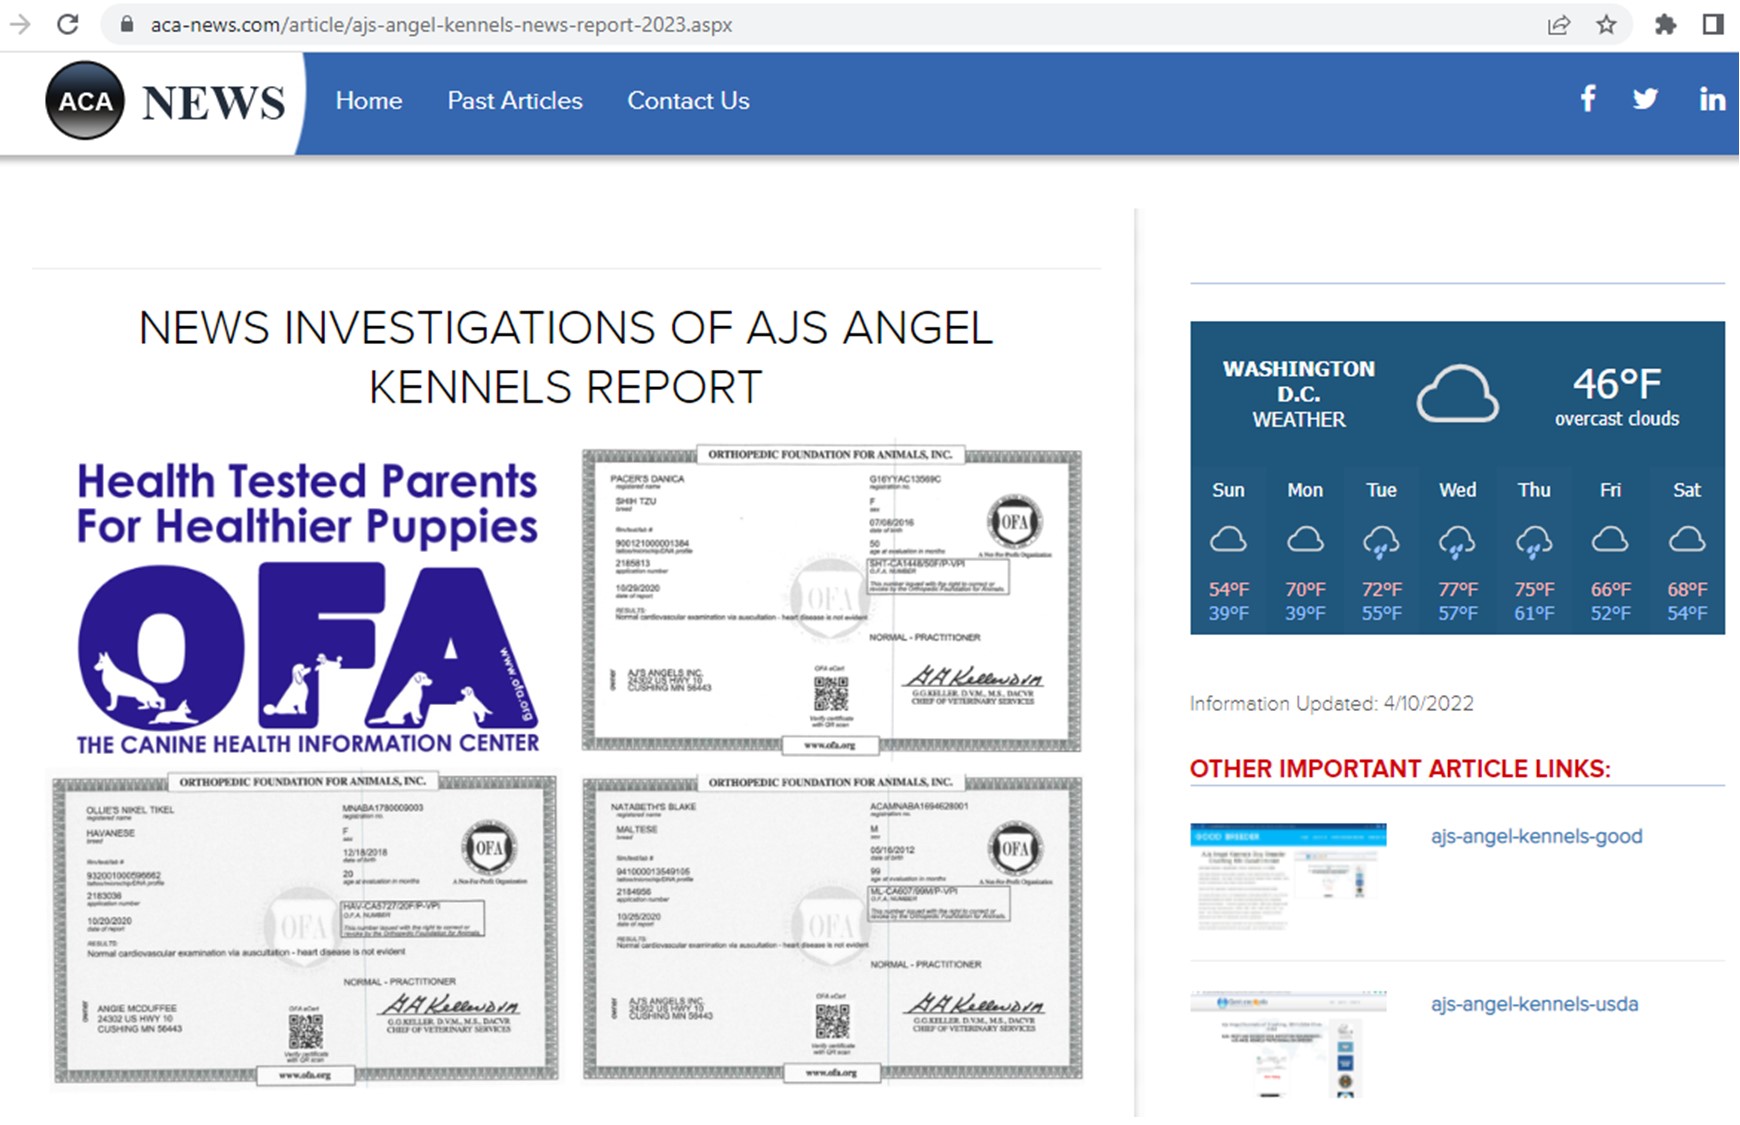 Ajs, Angel, Kennels, dog, breeder, news, report, article, investigation, Ajs-Angel-Kennels, Crushing, MN, Minnesota, puppy, dog, kennels, mill, puppymill, usda, 5-star, ACA, ICA, registered, show handler, yorkshire, terriers